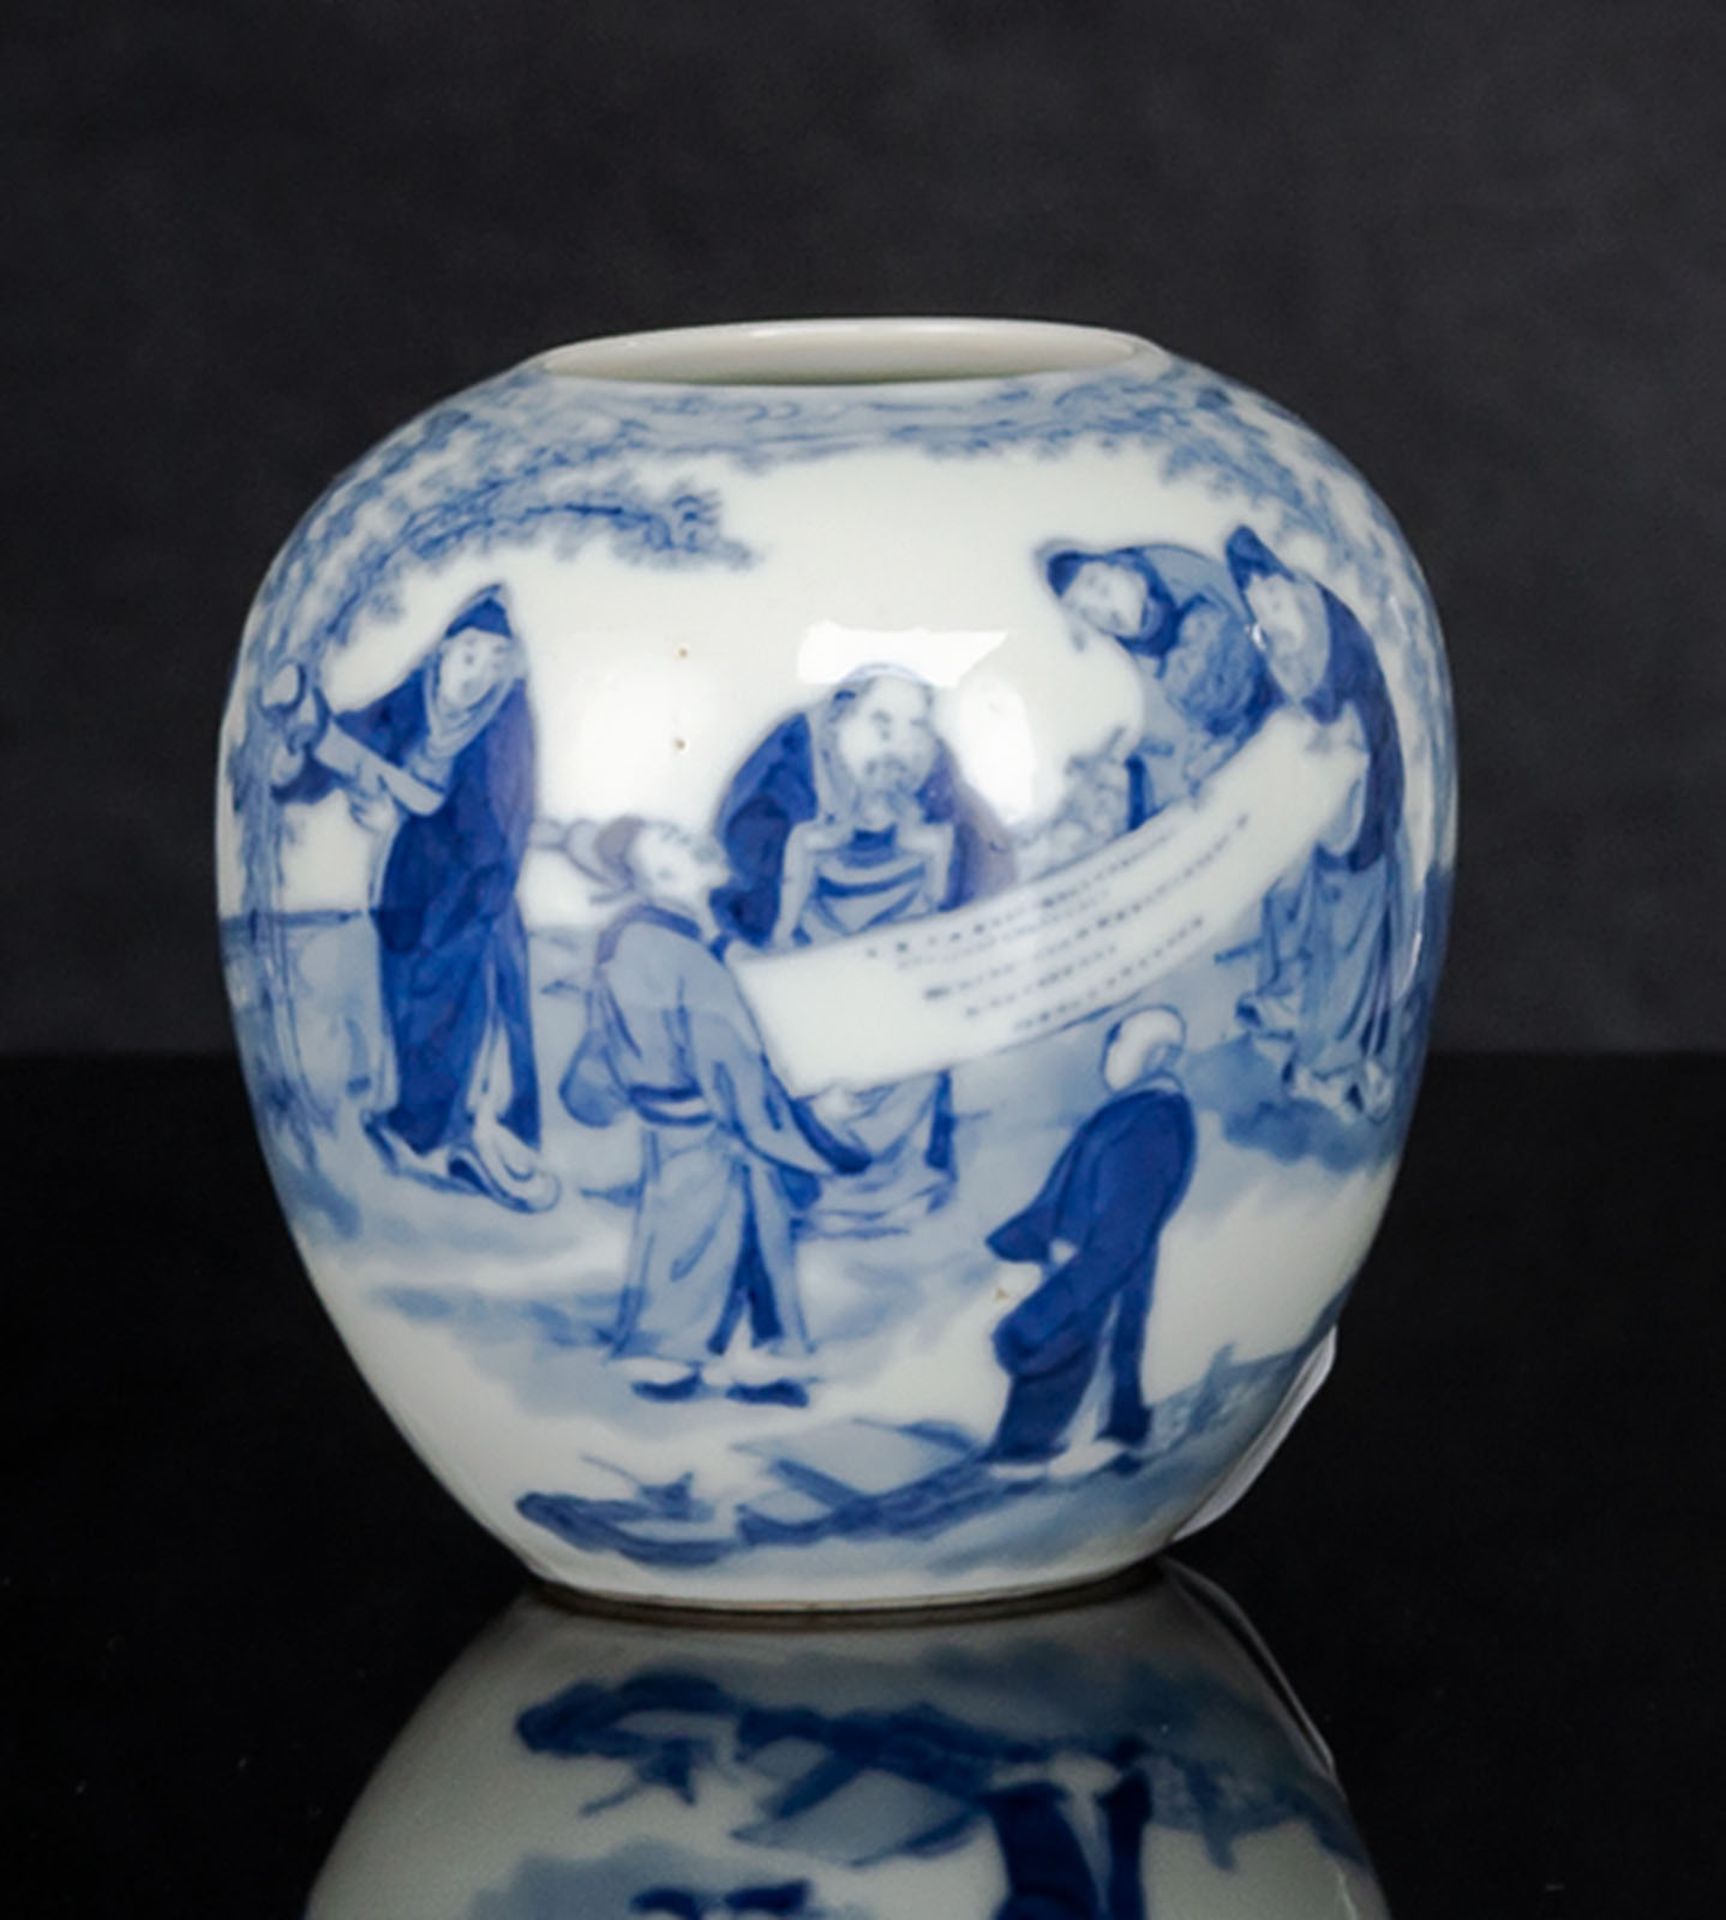 A GLOBULAR BLUE AND WHITE PORCELAIN WITH SCHIOLARS LOOKING AT A CALLIGRAPHY